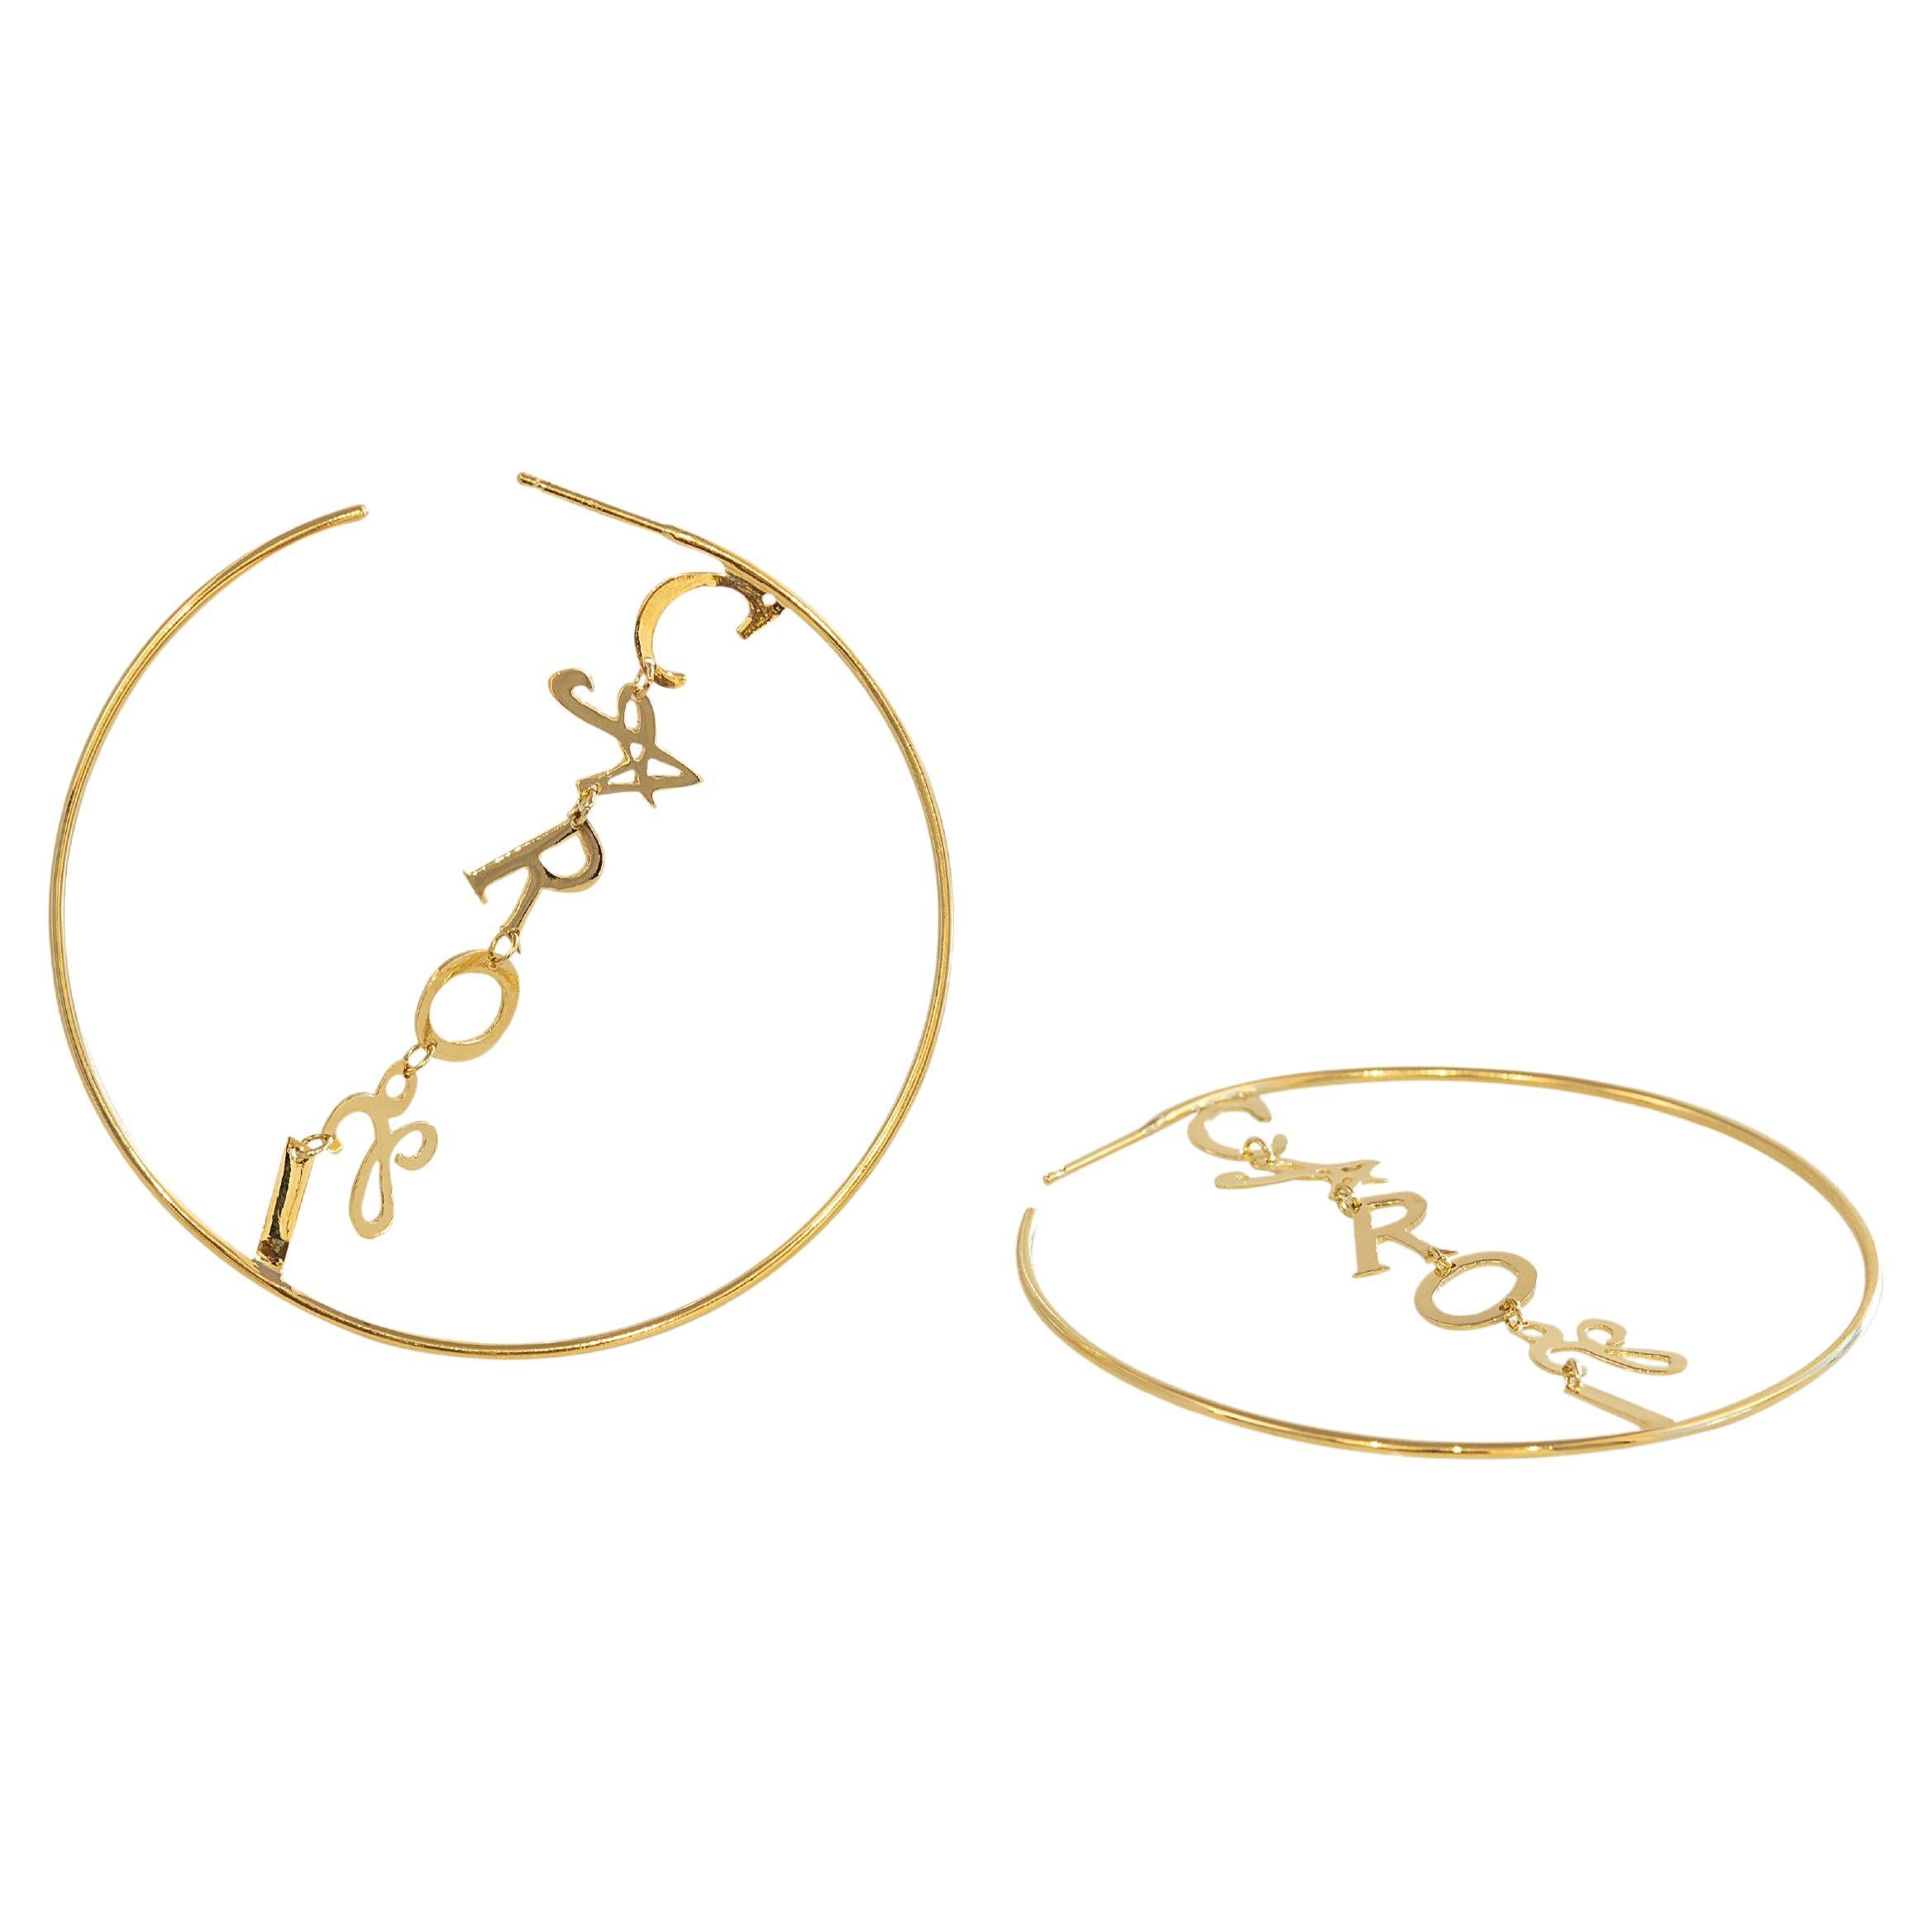 Personalize 18K Yellow Gold Bespoke Hoops Contemporary Letter Design Earrings For Sale